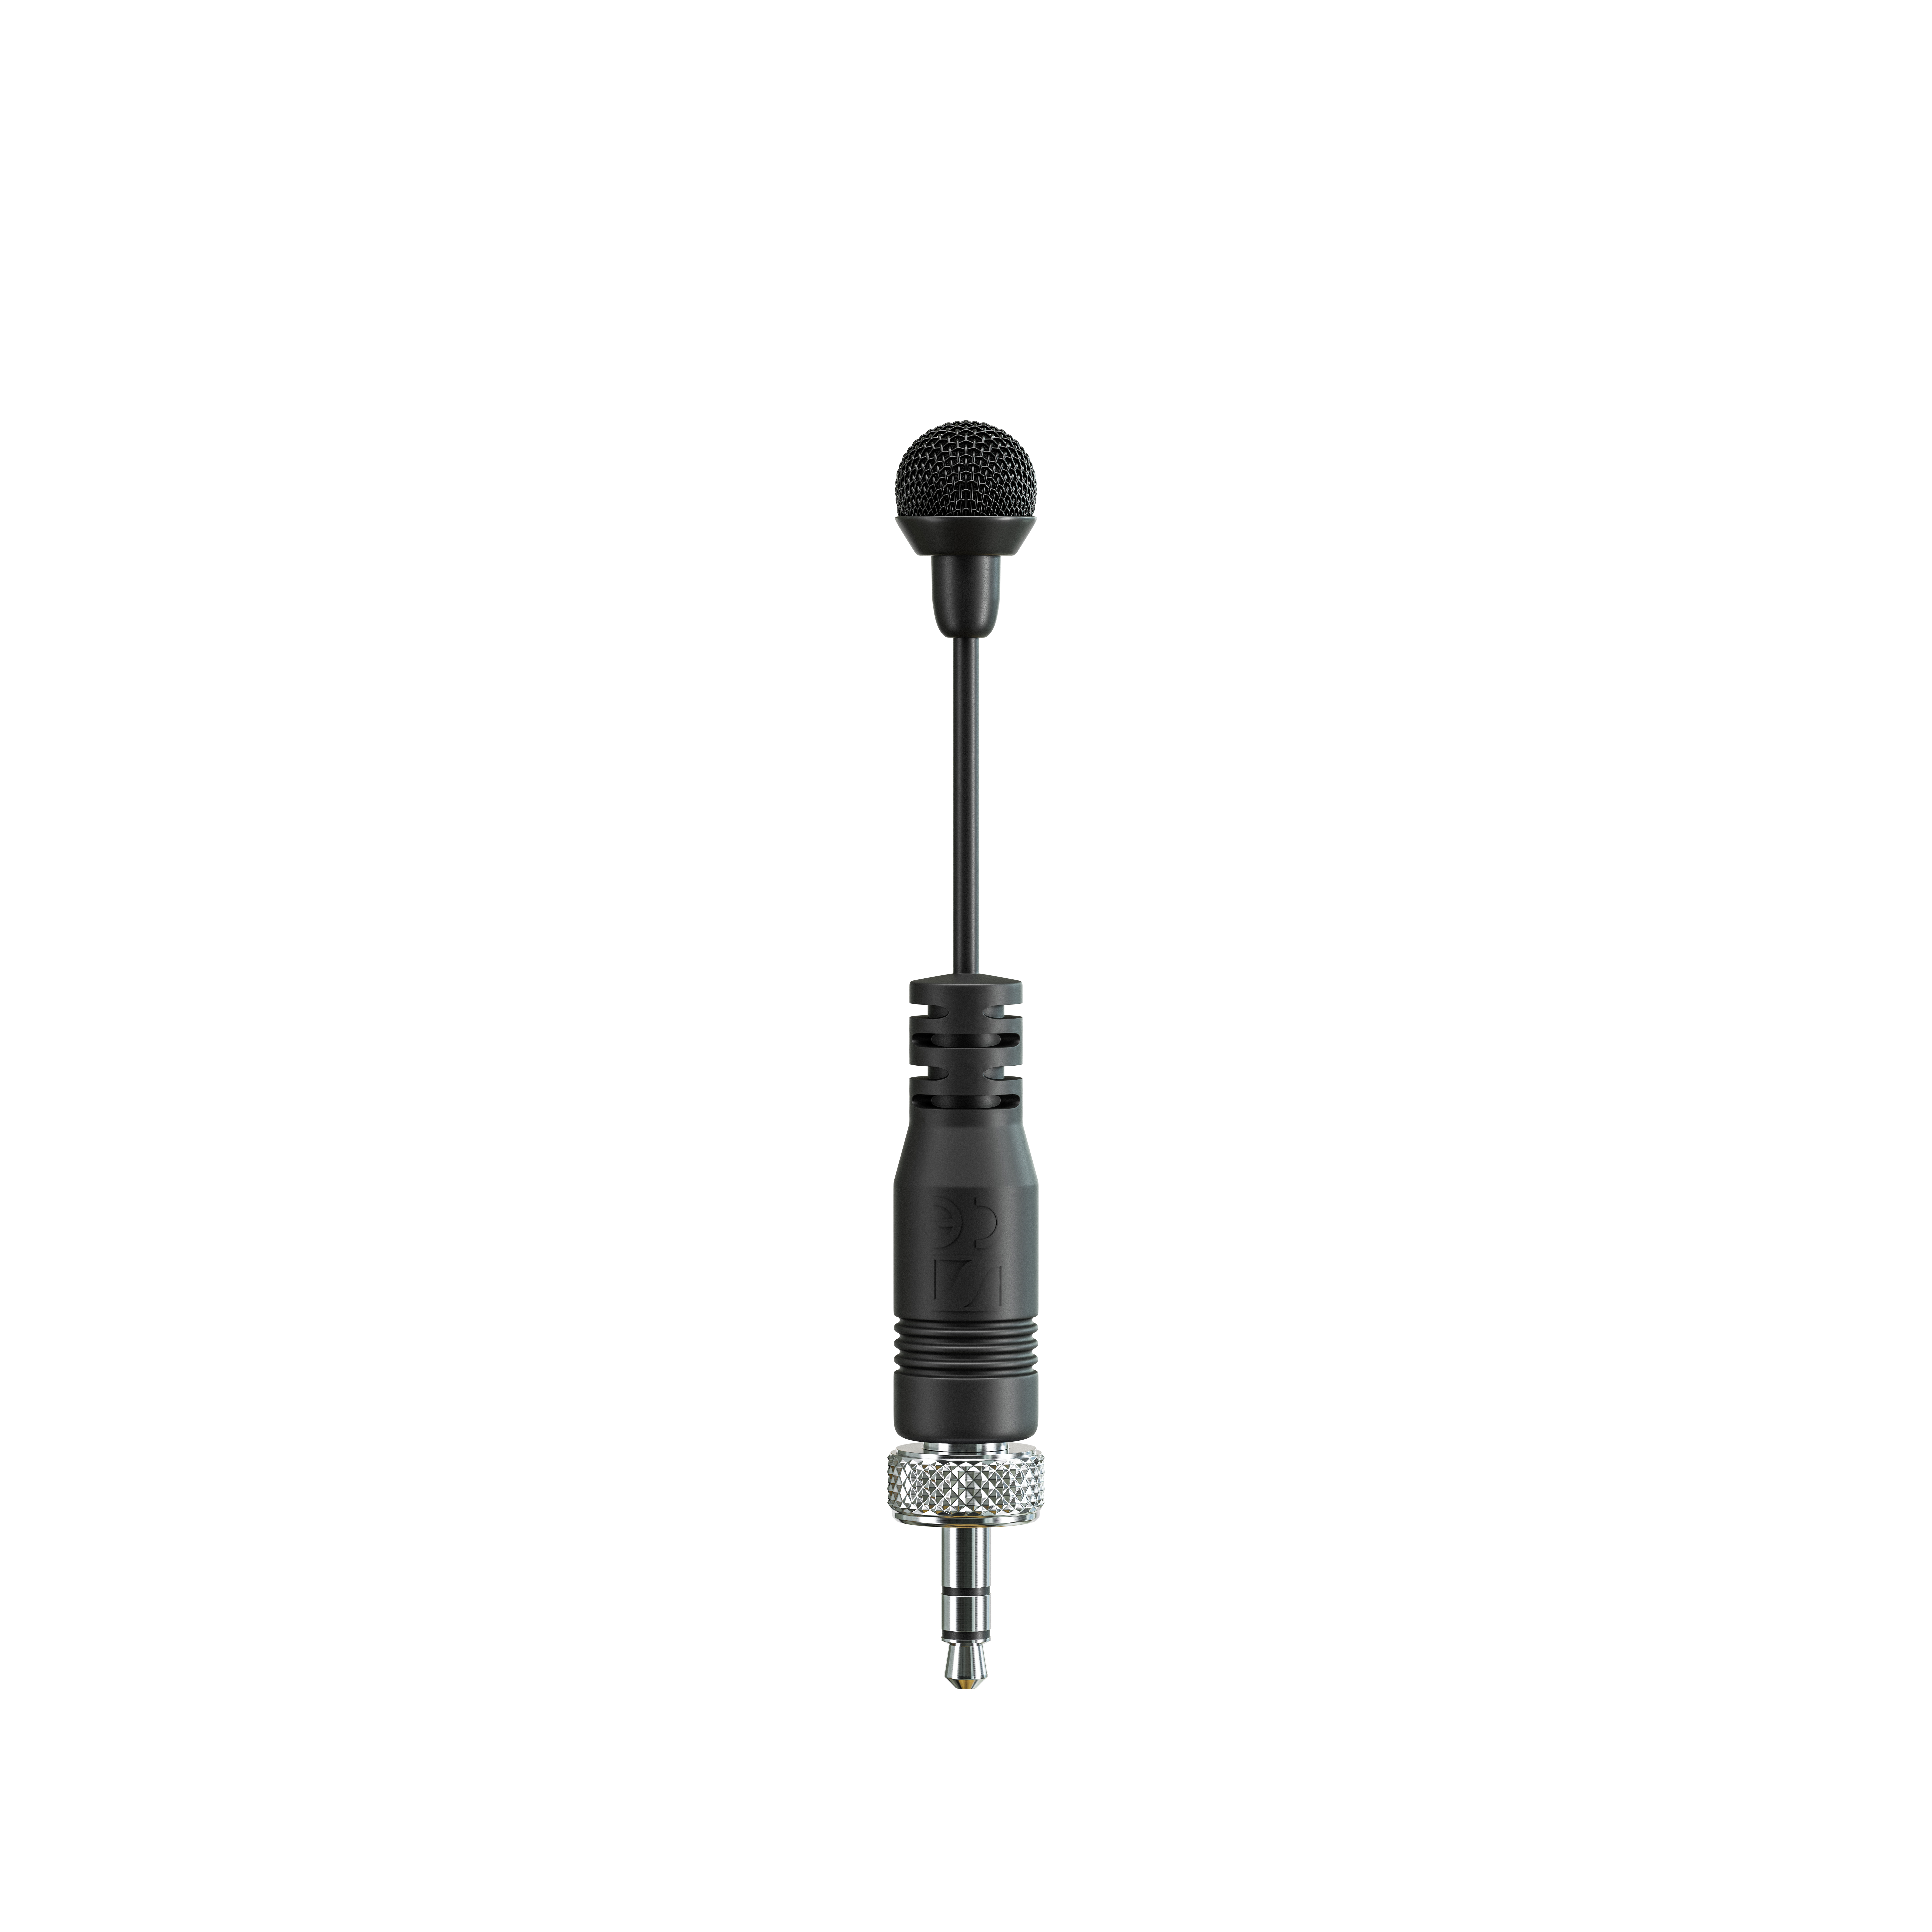 The MKE mini with Umbrella Diaphragm™ that protects the mic against sweat.